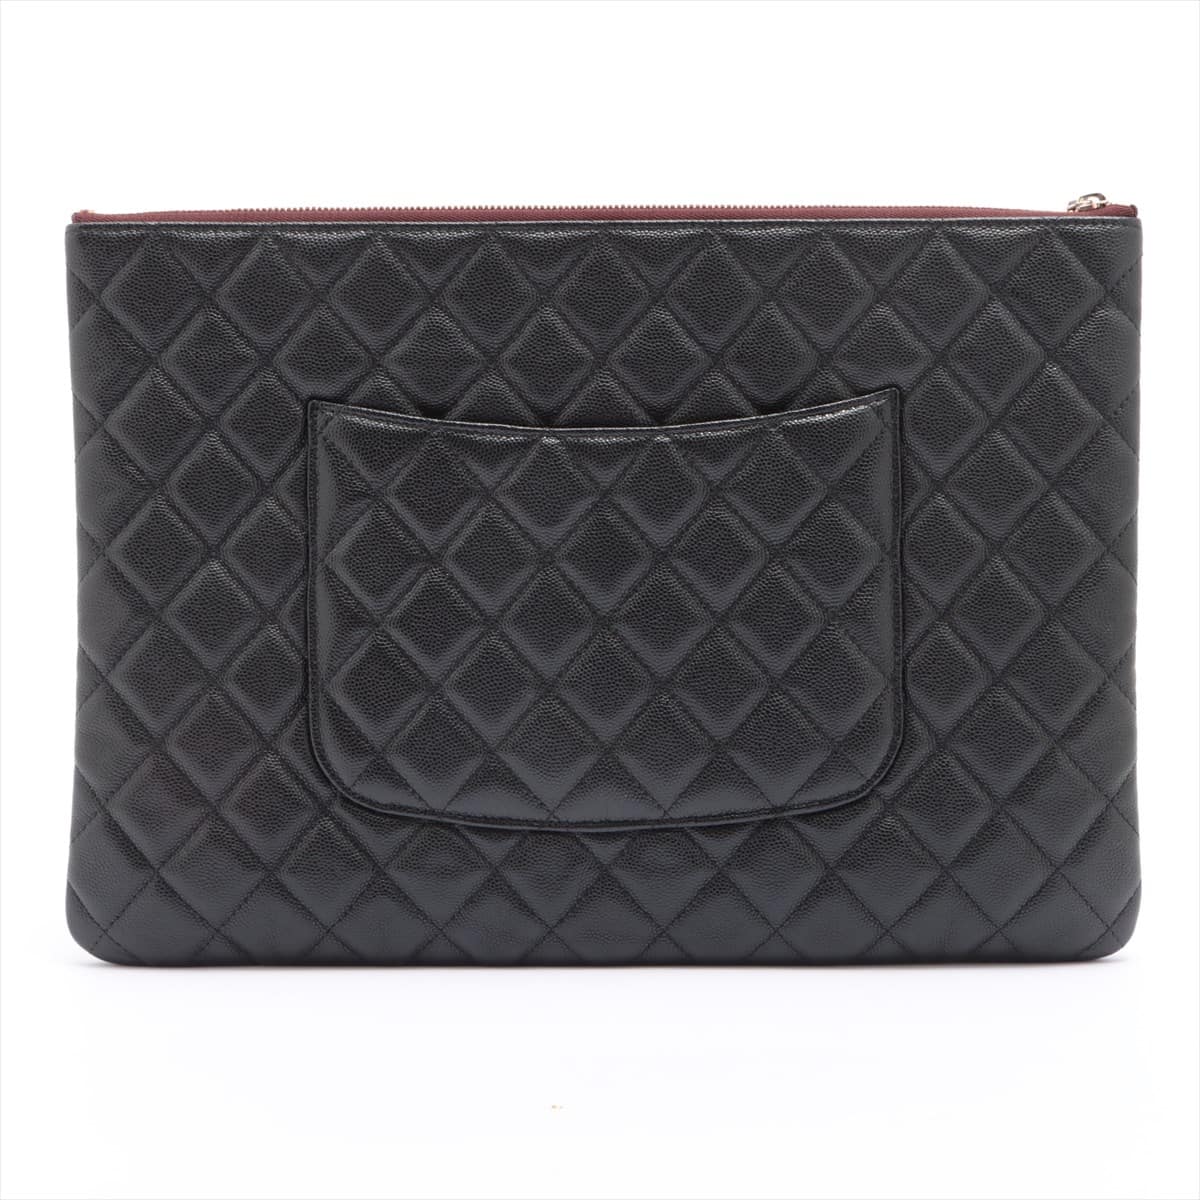 Chanel Coco Mark Caviarskin Clutch bag A82552 Black Gold Metal fittings 31st